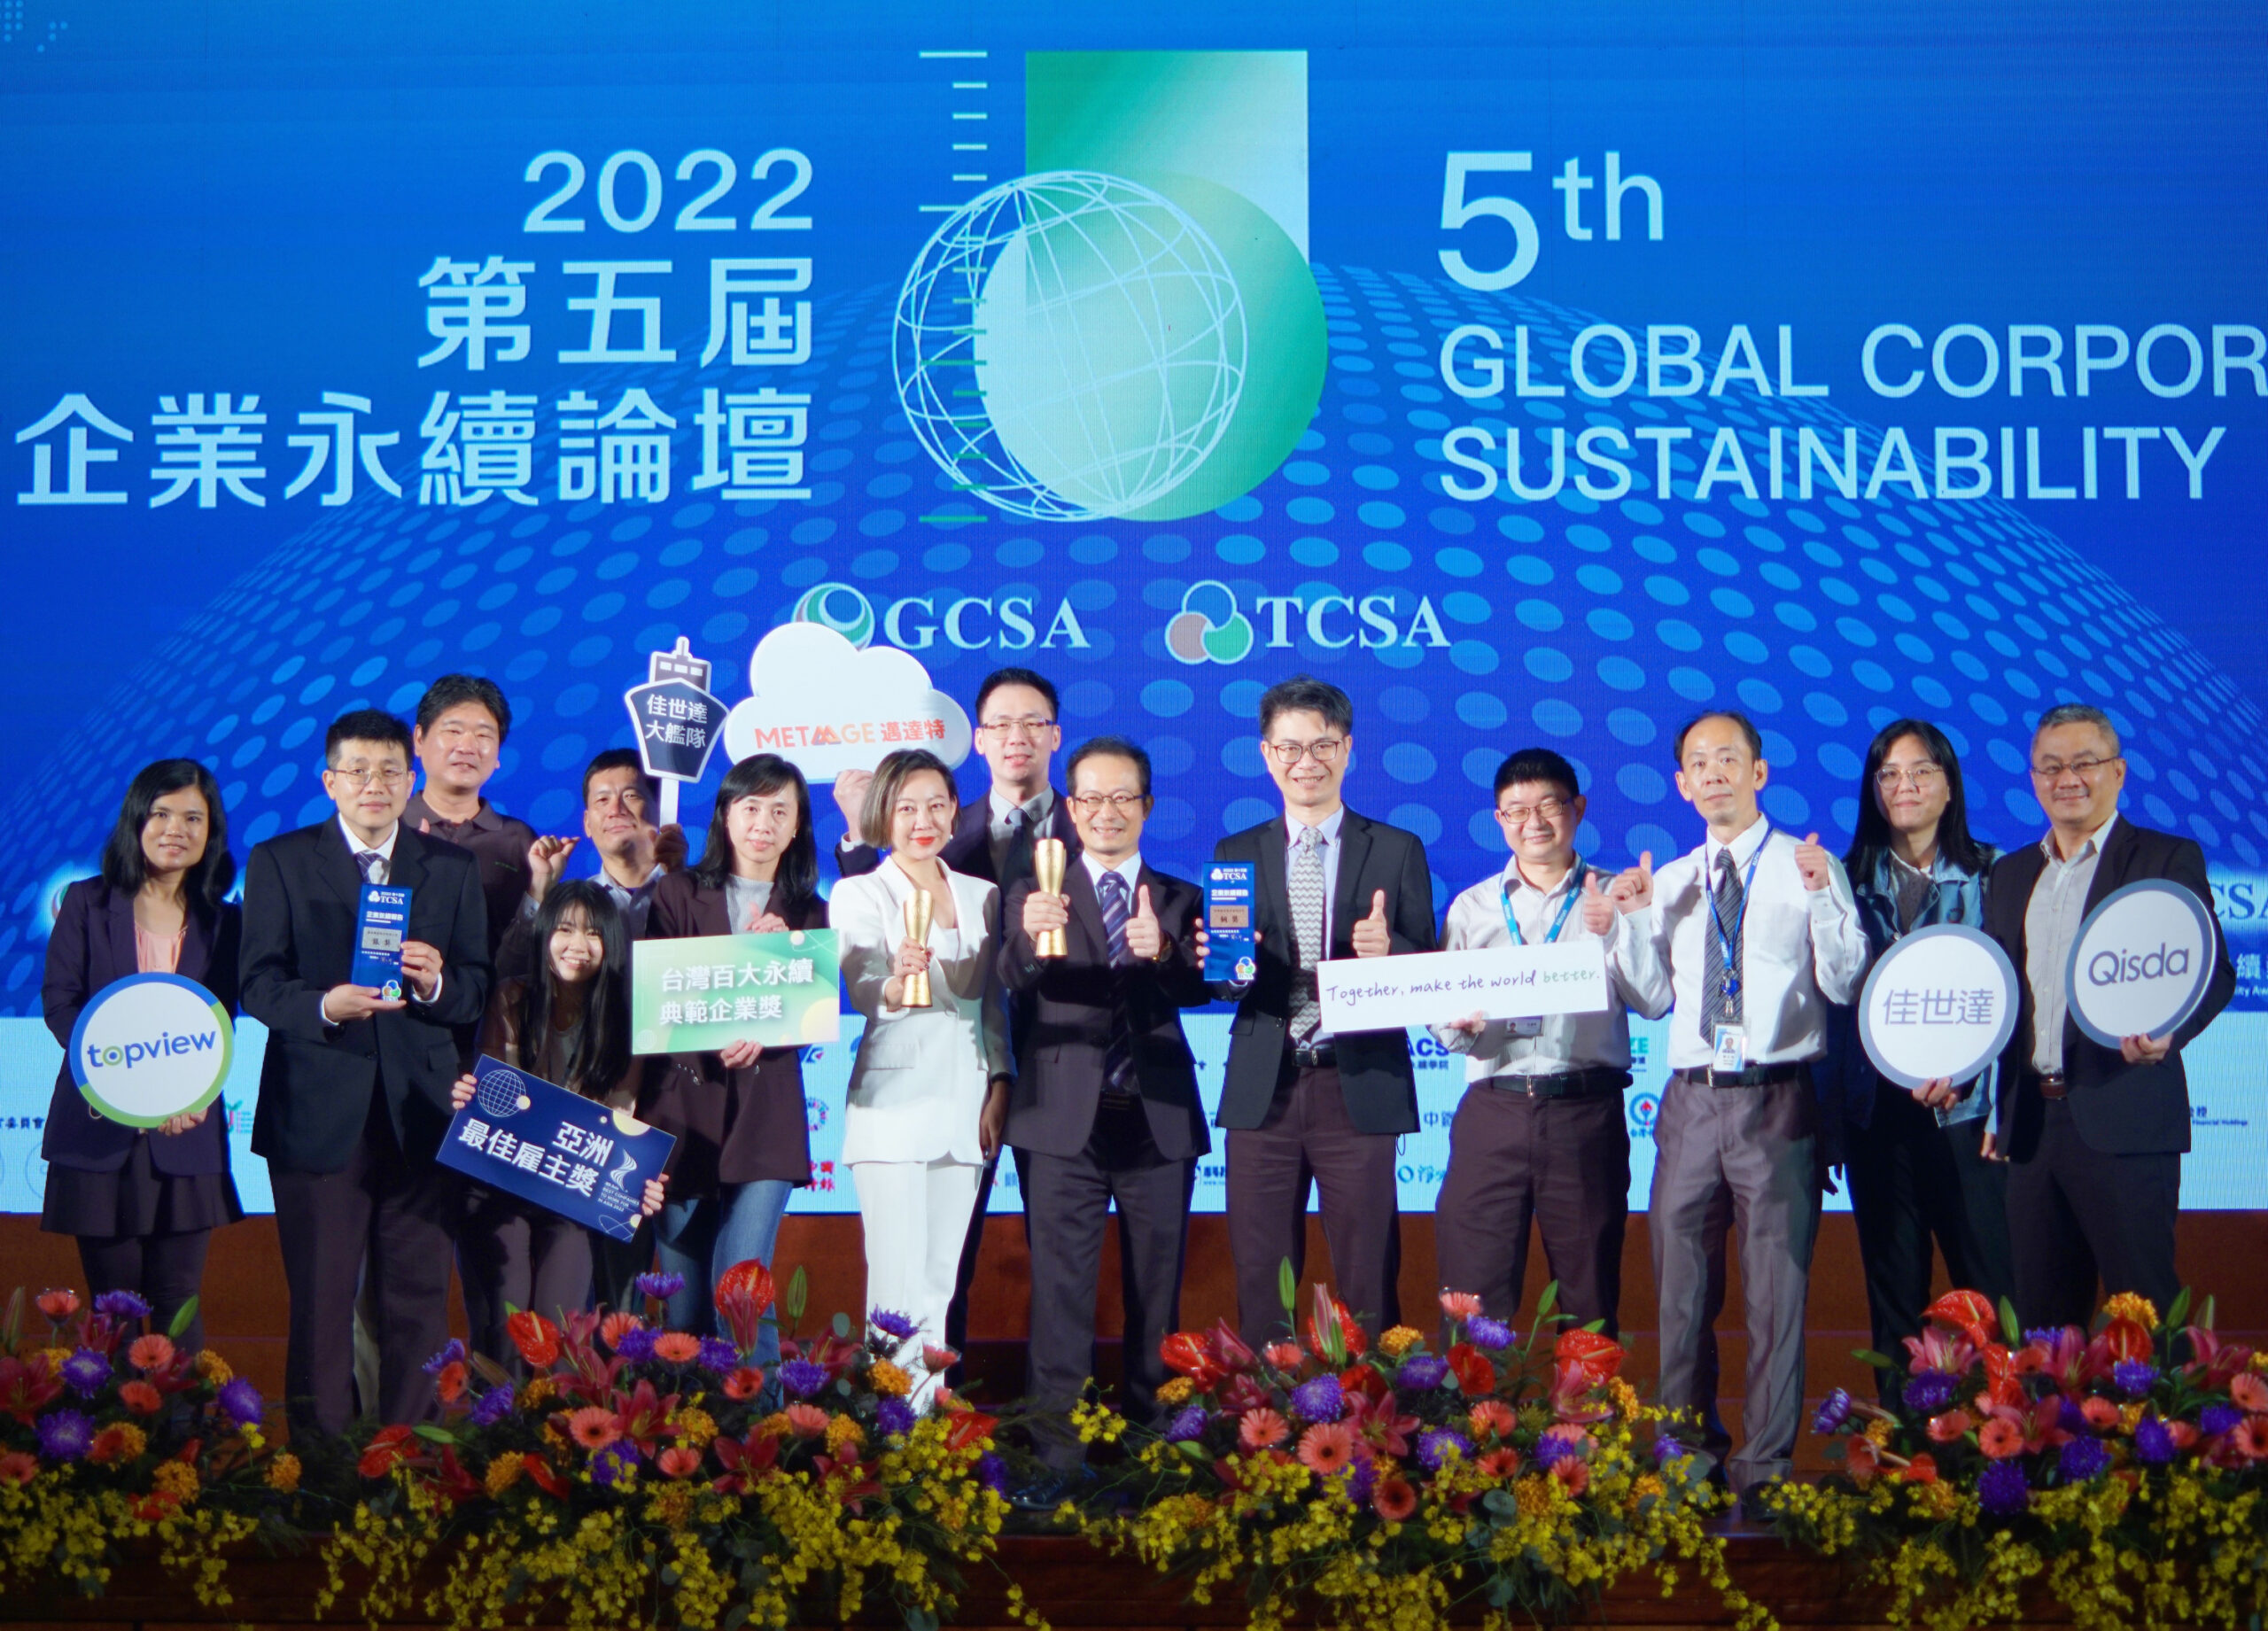 DFI Displays its Mobility with their First Win of the 2022 Taiwan Corporate Sustainability Award